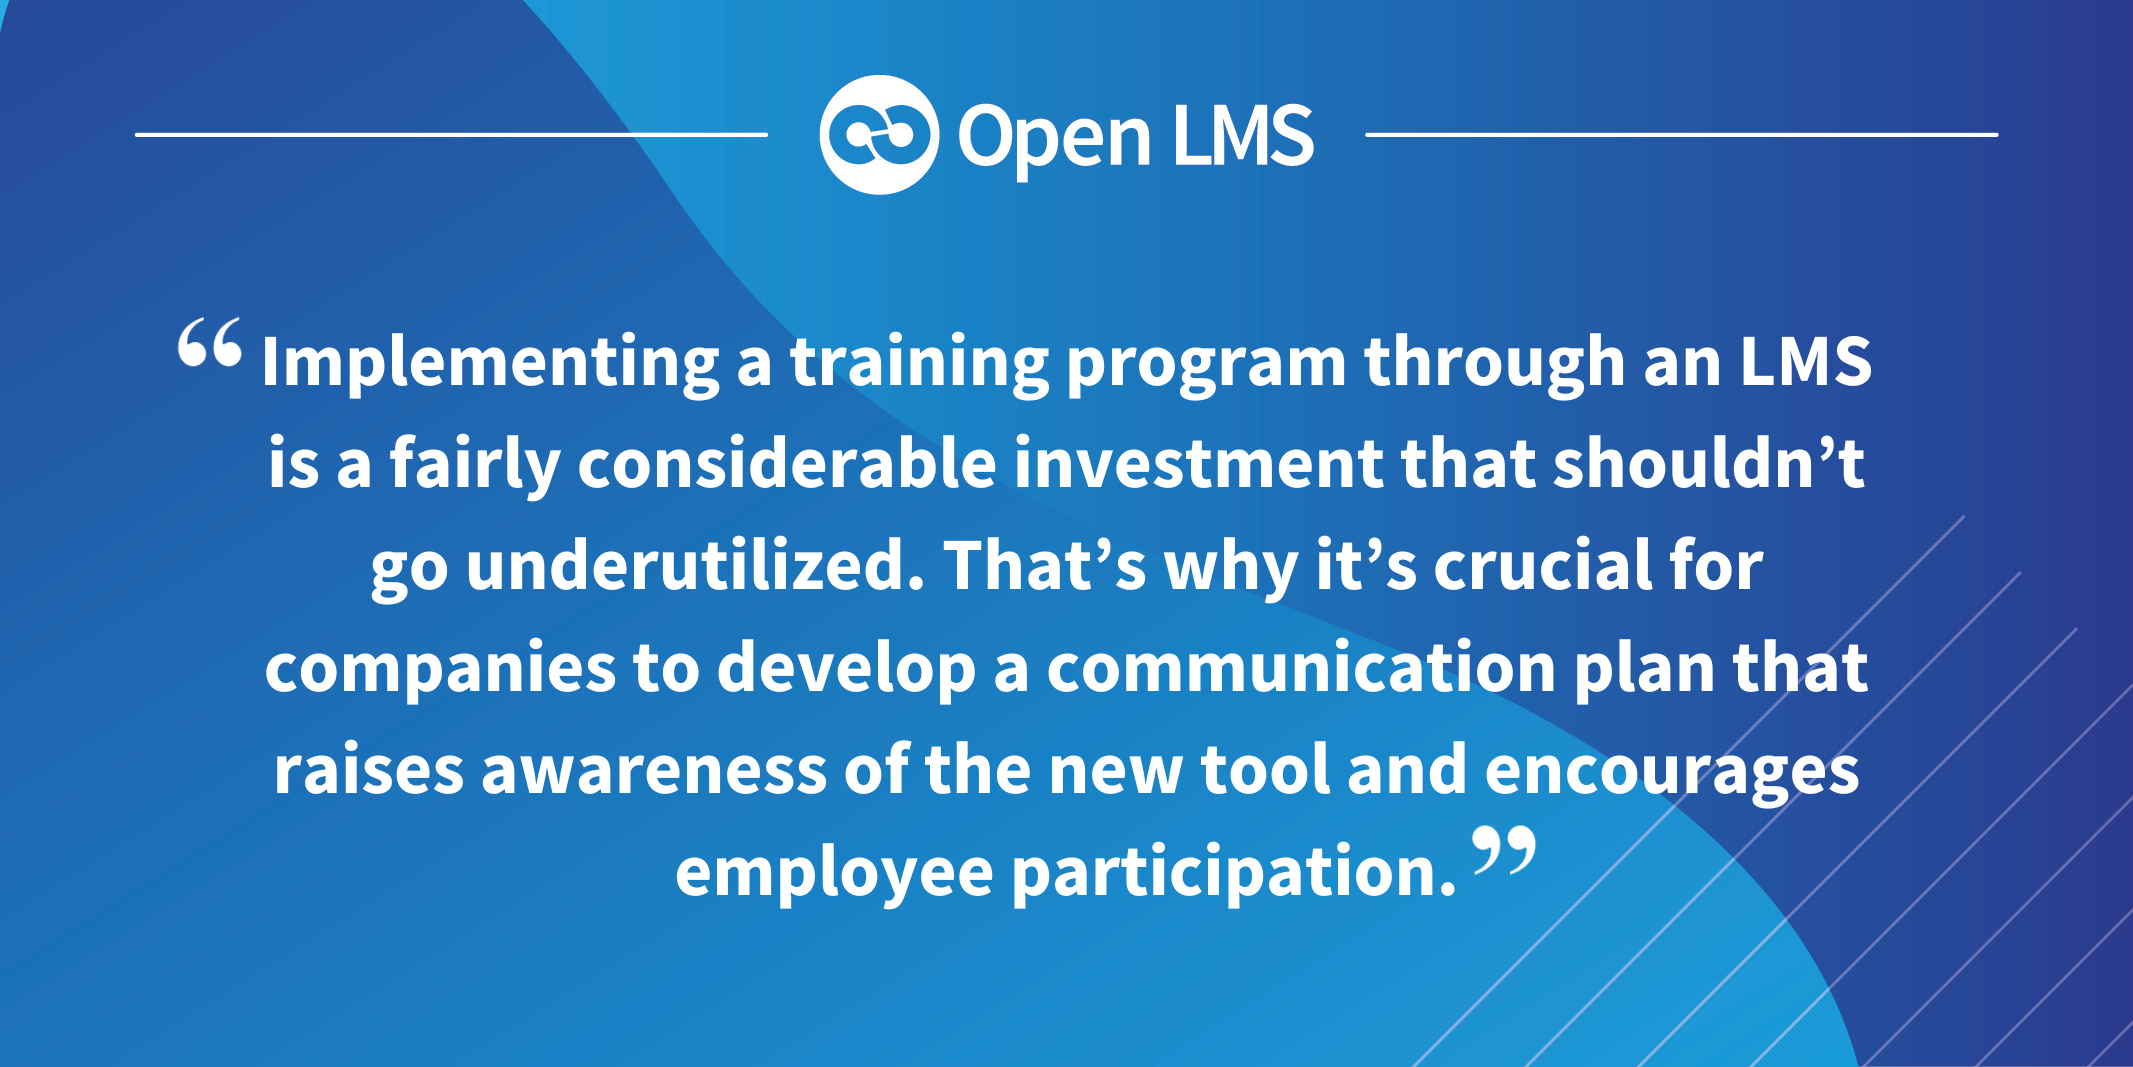 Implementing a training program through an LMS is a fairly considerable investment that shouldn’t go underutilized. That’s why it’s crucial for companies to develop a communication plan that raises awareness of the new tool and encourages employee participation